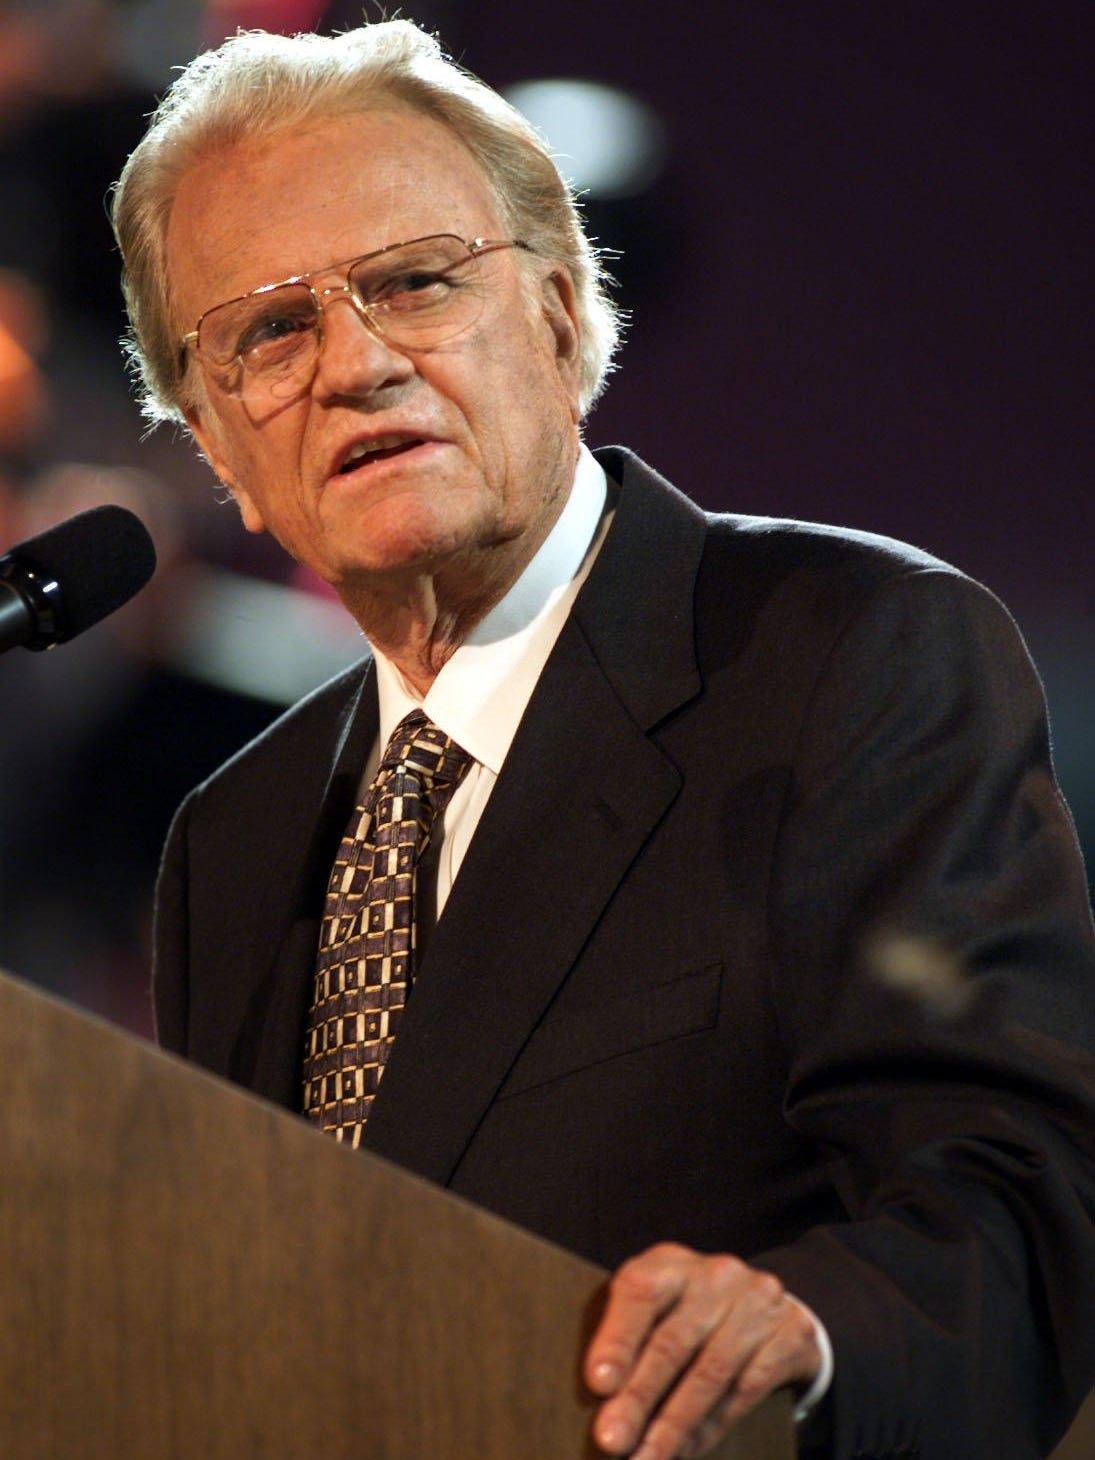 DOWNLOAD MP3: FINDING GOD'S WILL YOUR LIFE By Billy Graham (sermon) 19